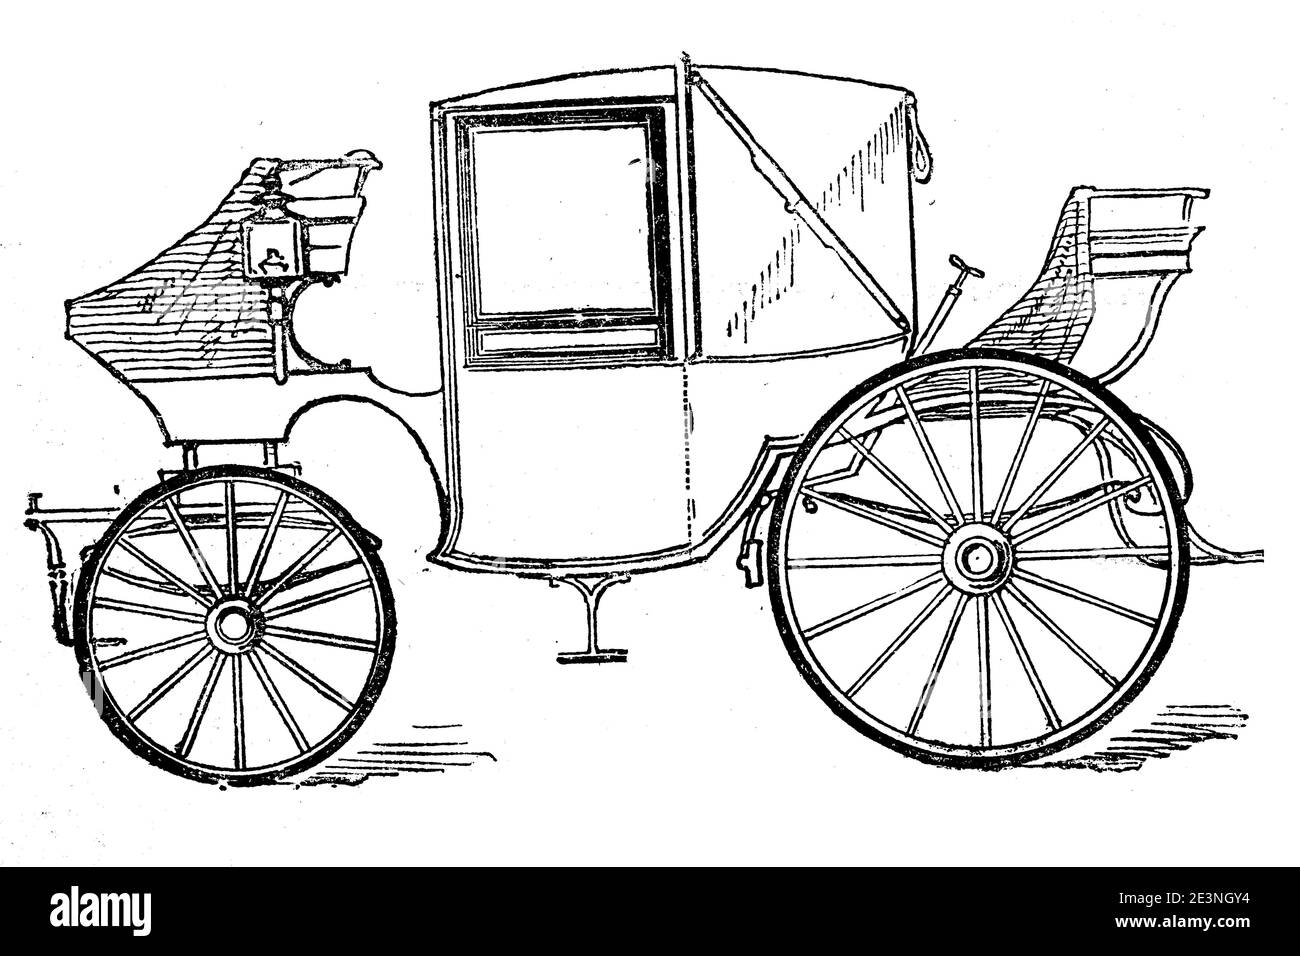 Carriage, Landaulet, two-horse, four-wheeled travelling carriage for two persons, illustration from 1870  /  Kutsche, Landaulet, zweispännige, vierrädrige Reisekutsche für zwei Personen, Illustration aus 1870, Historisch, historical, digital improved reproduction of an original from the 19th century / digitale Reproduktion einer Originalvorlage aus dem 19. Jahrhundert, Stock Photo